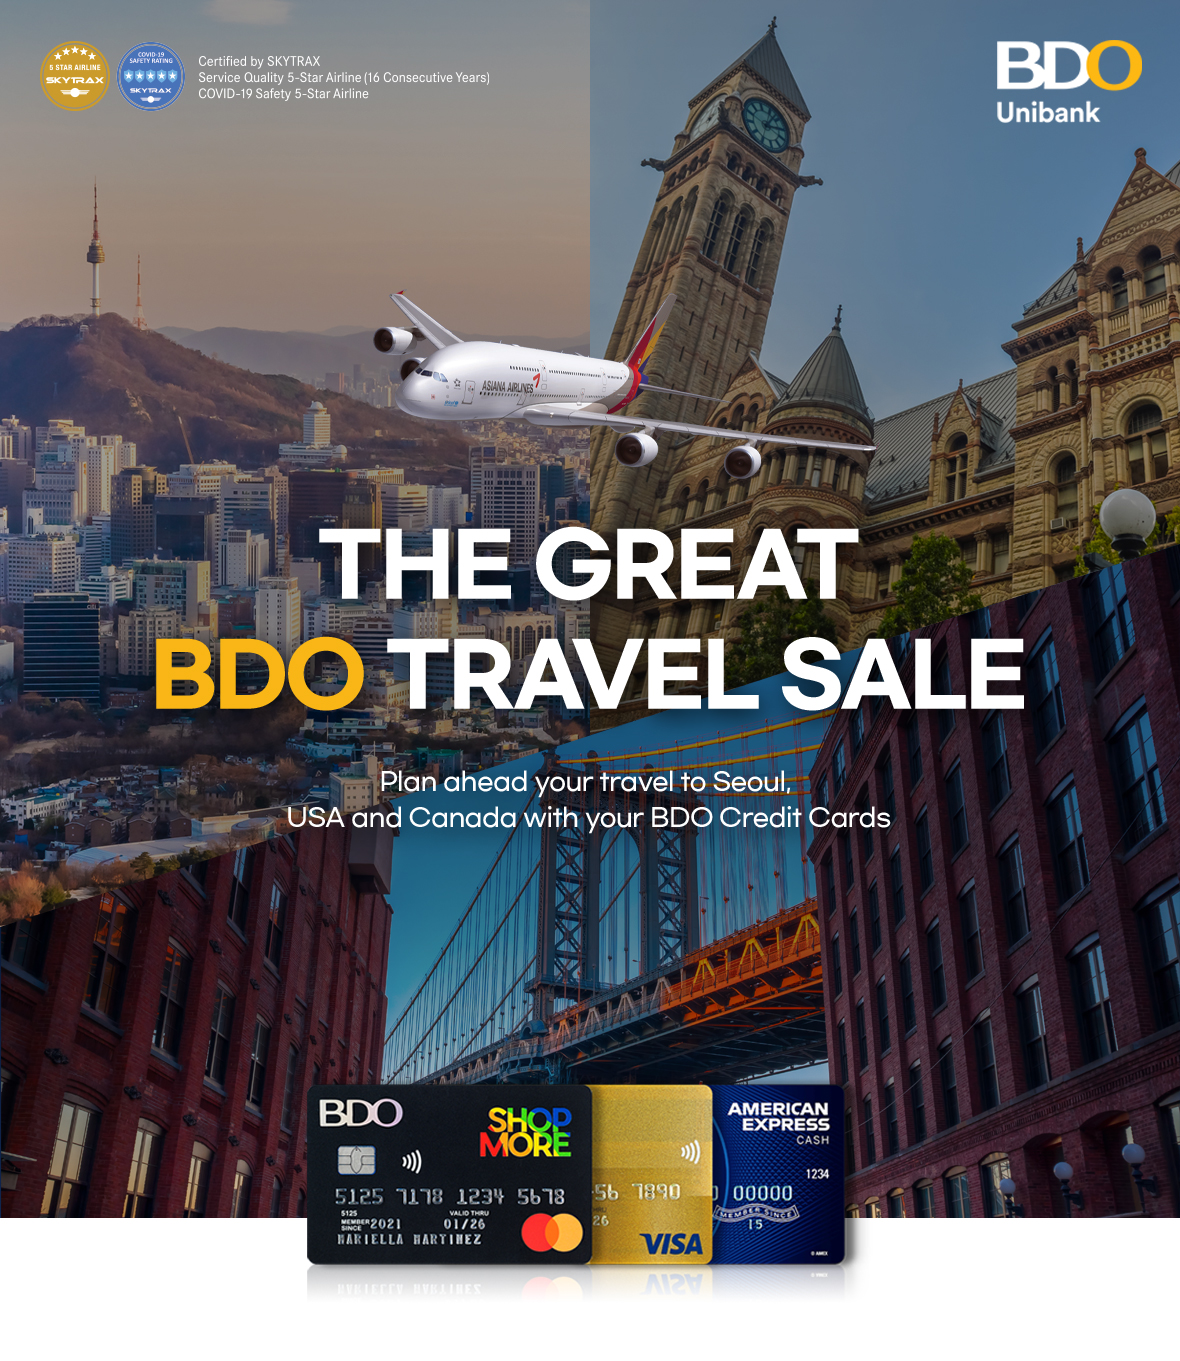 Asiana x The Great BDO Travel Sale│ASIANA AIRLINES